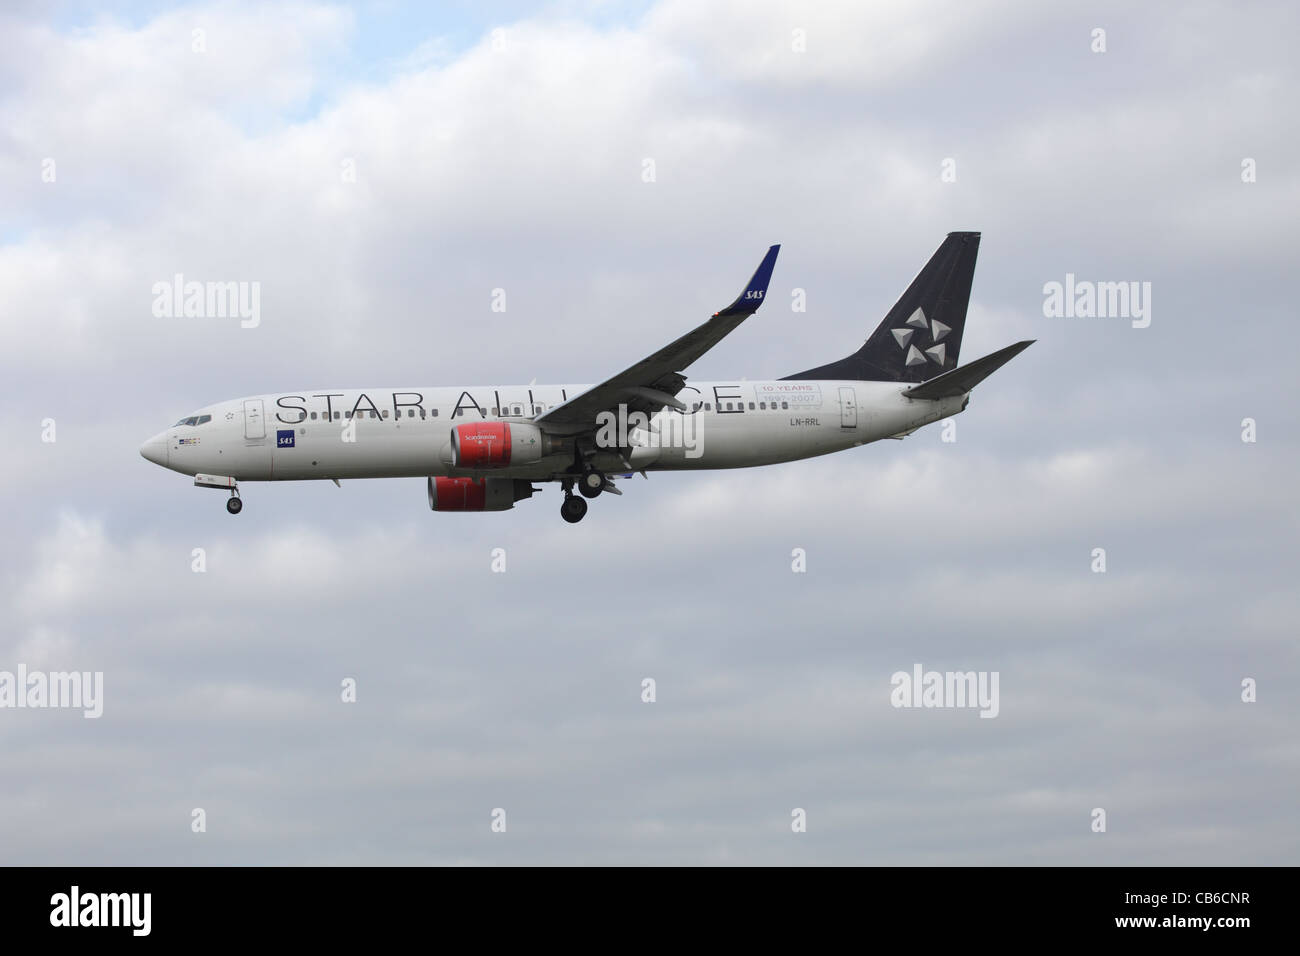 Star Alliance Scandinavian Airlines SAS Boeing 737-883 LN-RRL on approach to Heathrow : cloudy sky Stock Photo